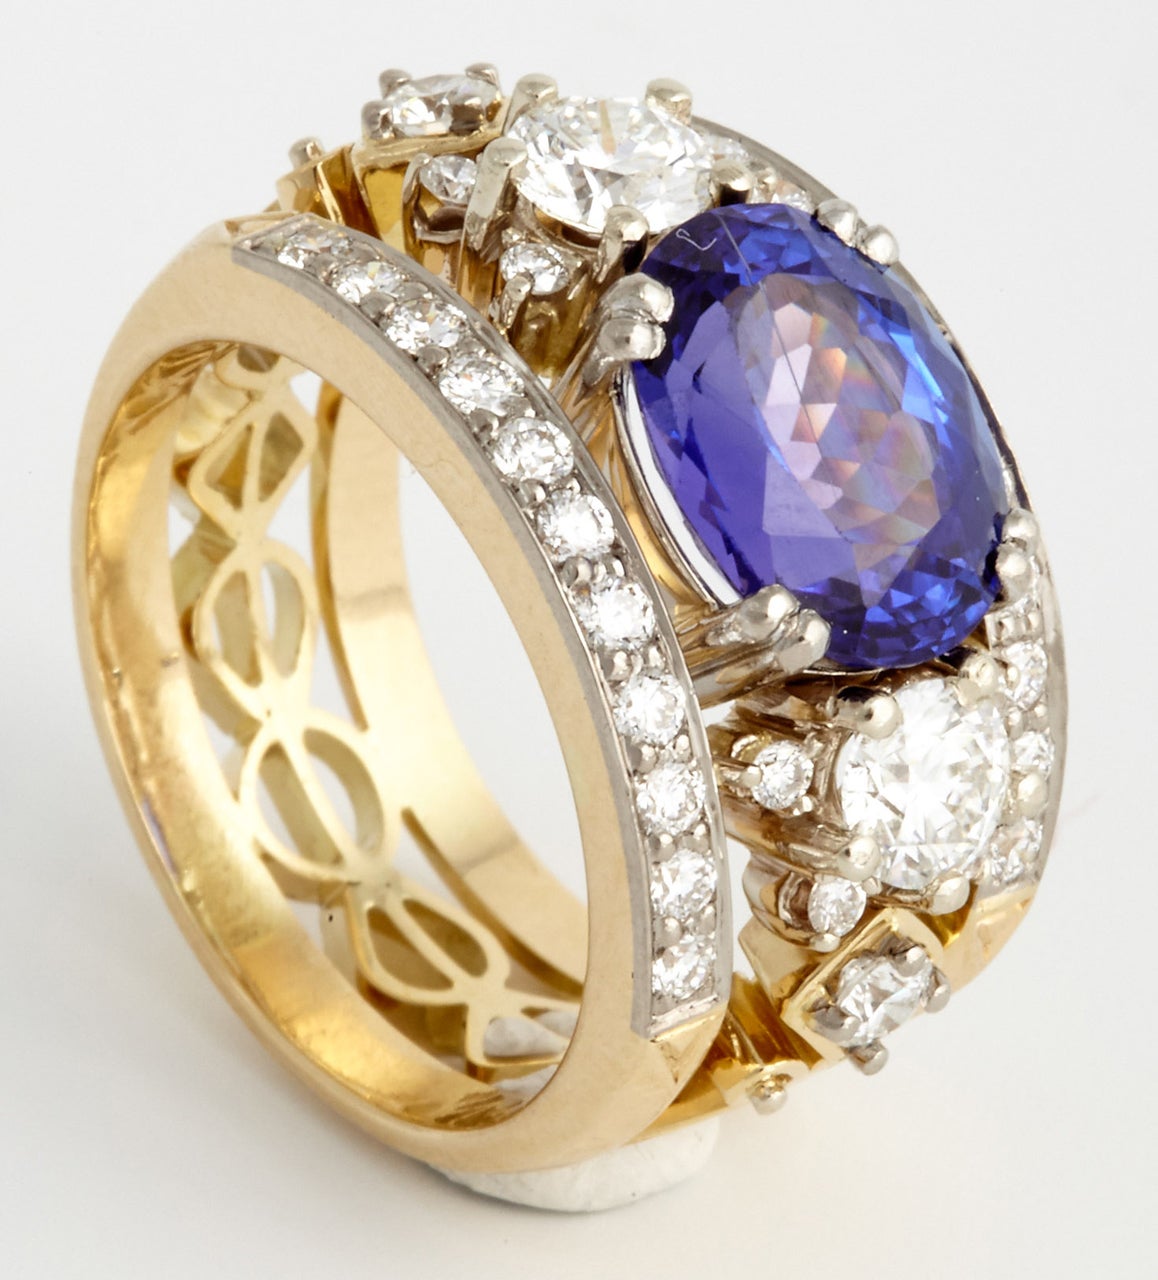 A yellow golden tanzanite and diamond harp ring. Centrally set is an oval mixed cut tanzanite, weight 3.43 ct with a deep blue, triple AAA grade colour. On either side of the tanzanite are two brilliant cut diamonds and above and below are two rows